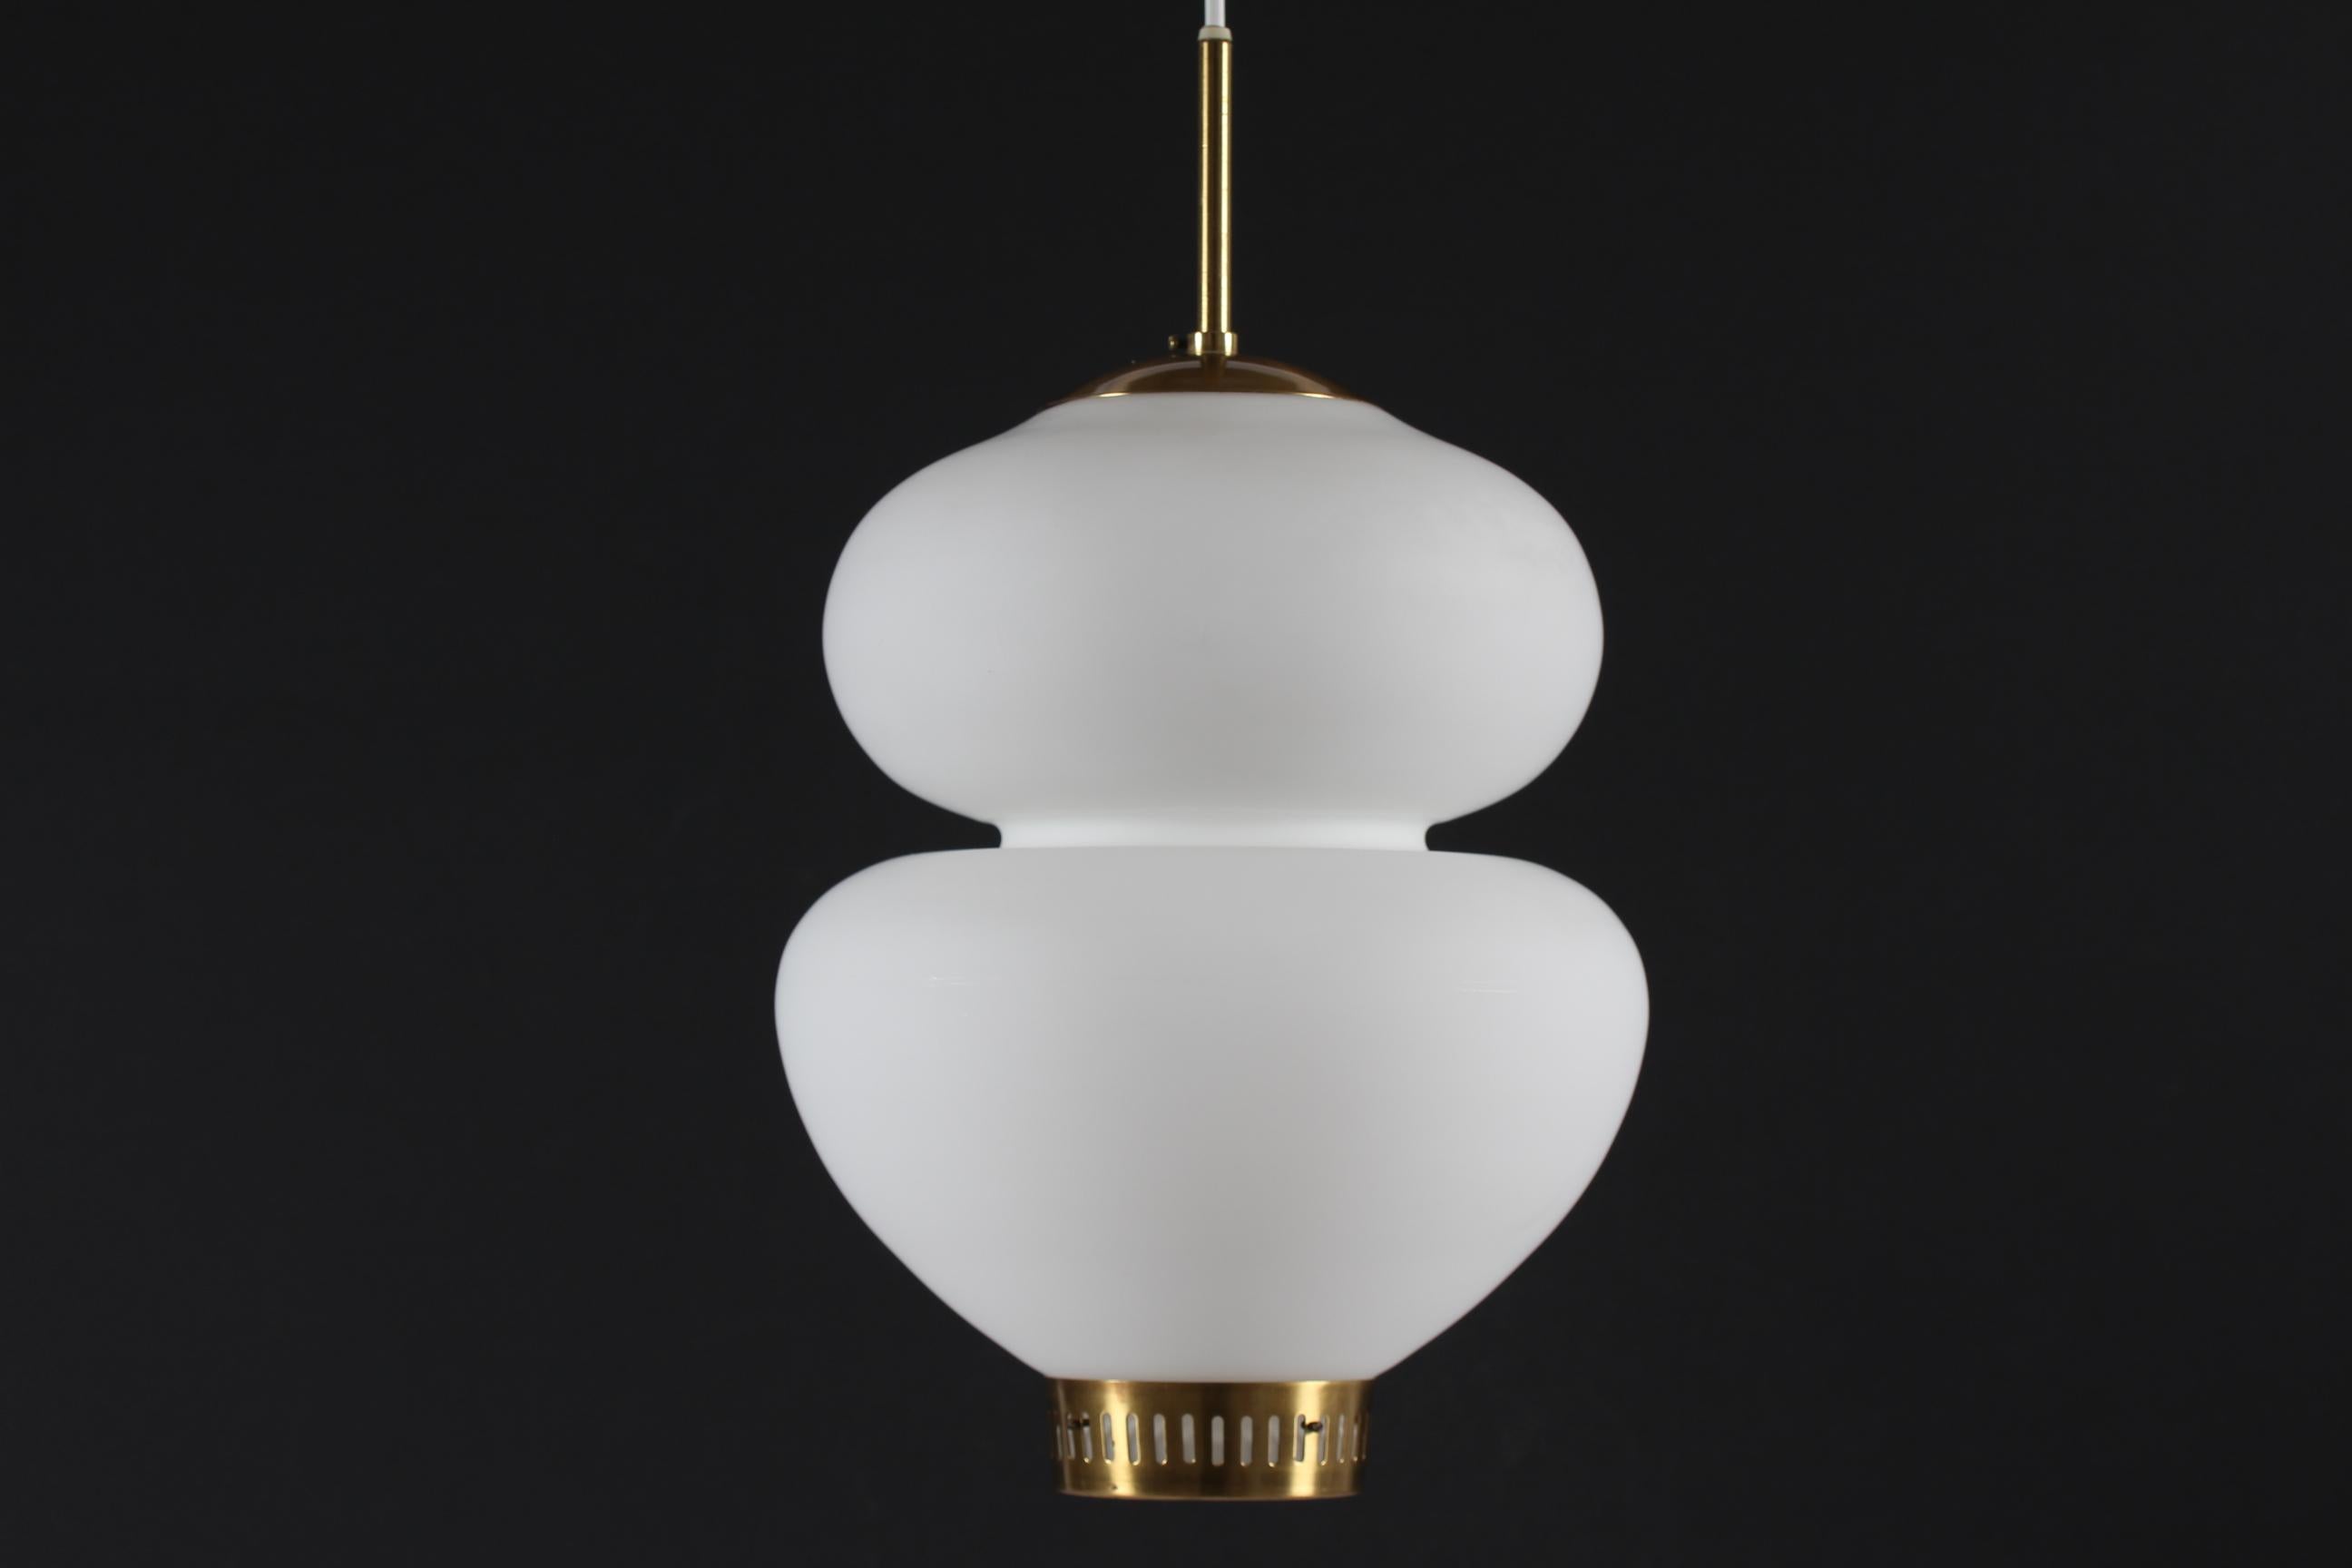 The Peanut pendent is made of white mouth-blown opaline glass with brass fittings. 
It was designed by Danish Bent Karlby (1912-1998) in 1946 and is manufactured by the Danish lamp company Lyfa. The pendant light has a beautiful organic